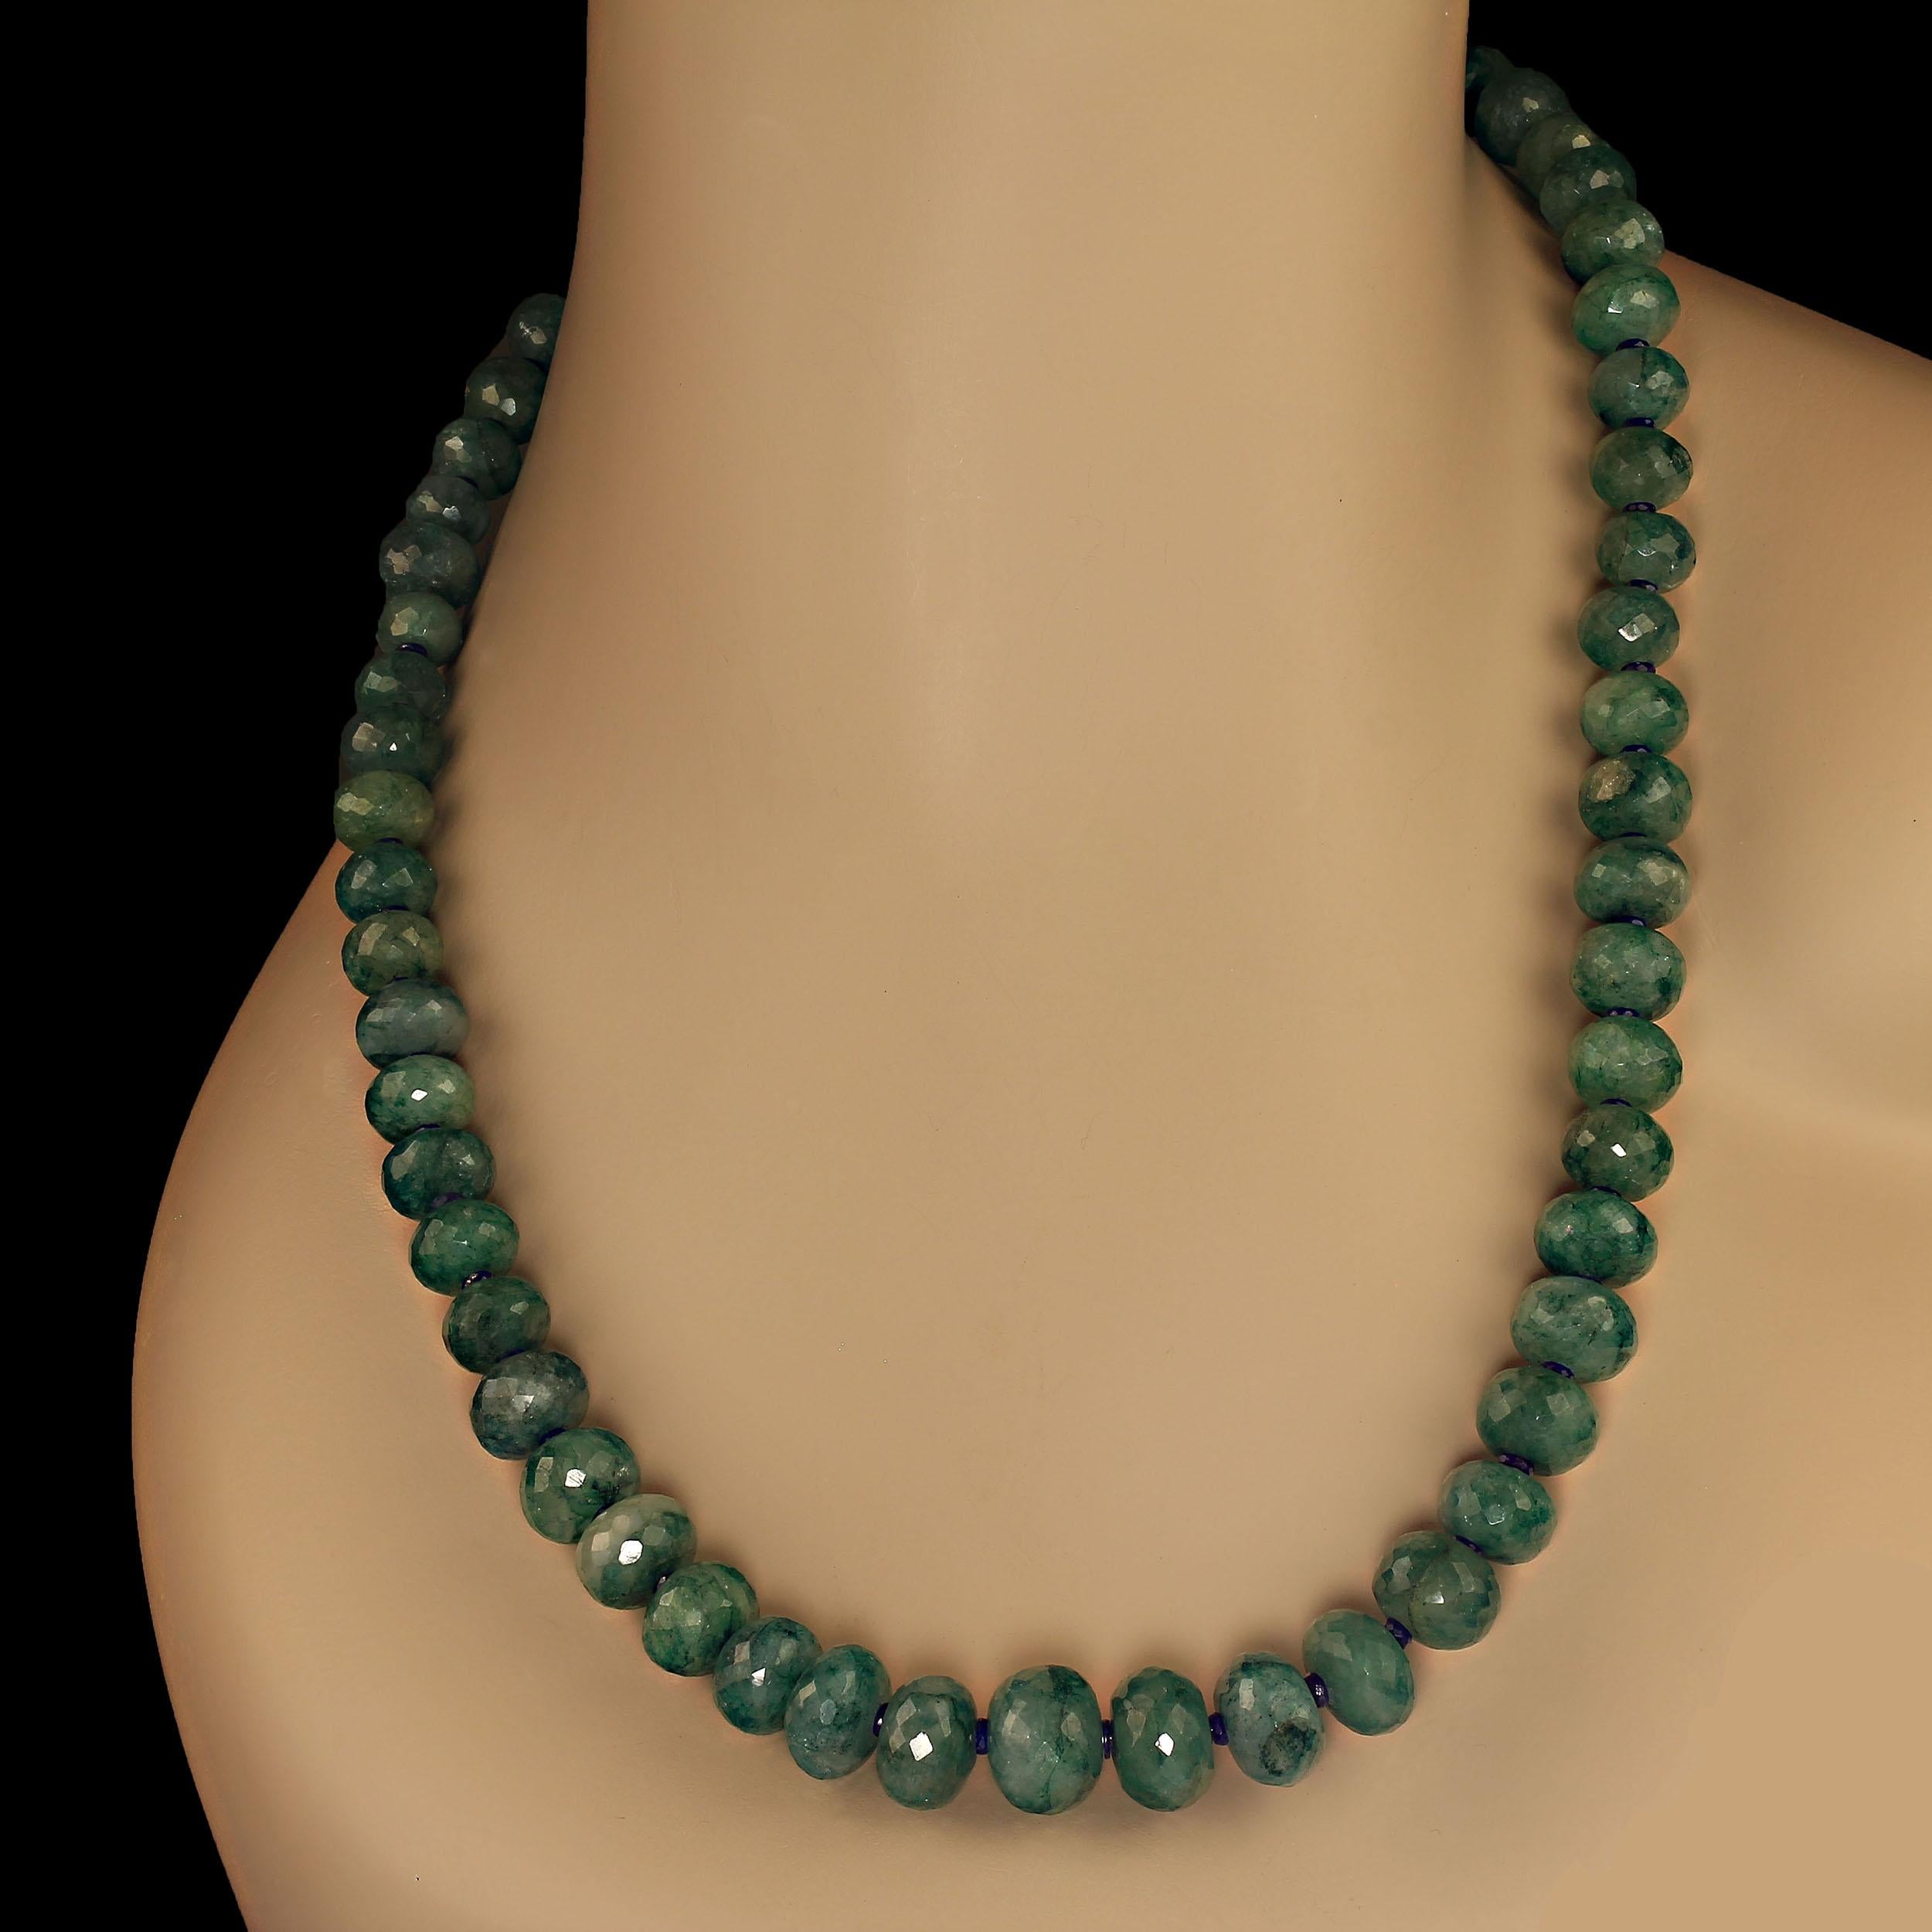 Artisan AJD 21 Inch Green Beryl/Emerald Graduated Faceted Necklace    Perfect Gift! For Sale